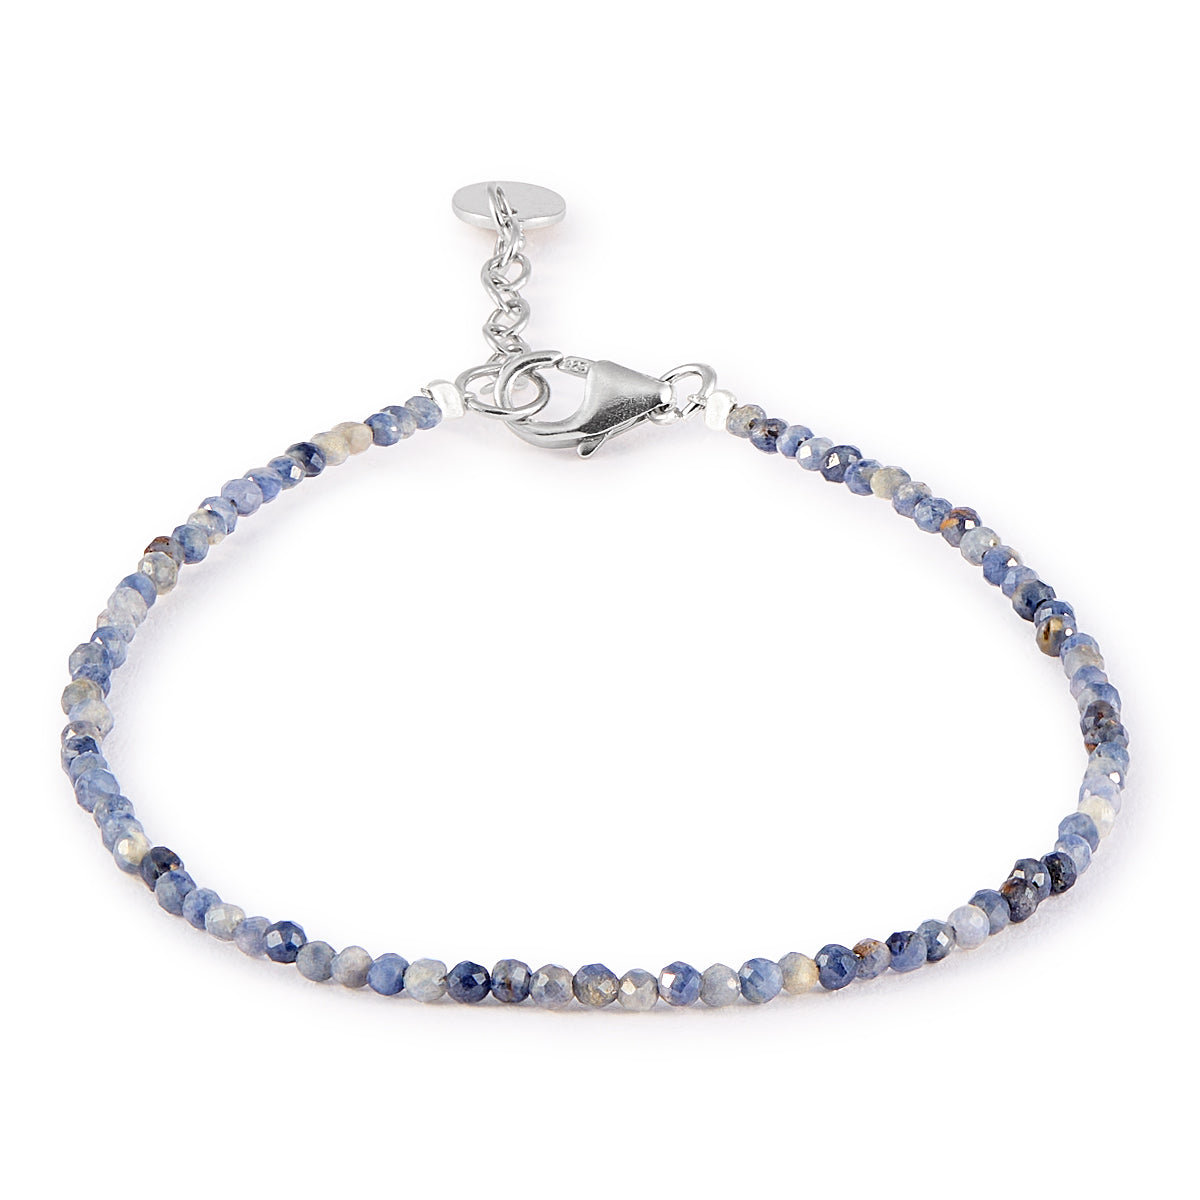 SAPPHIRE BRACELET WITH SILVER CLASP